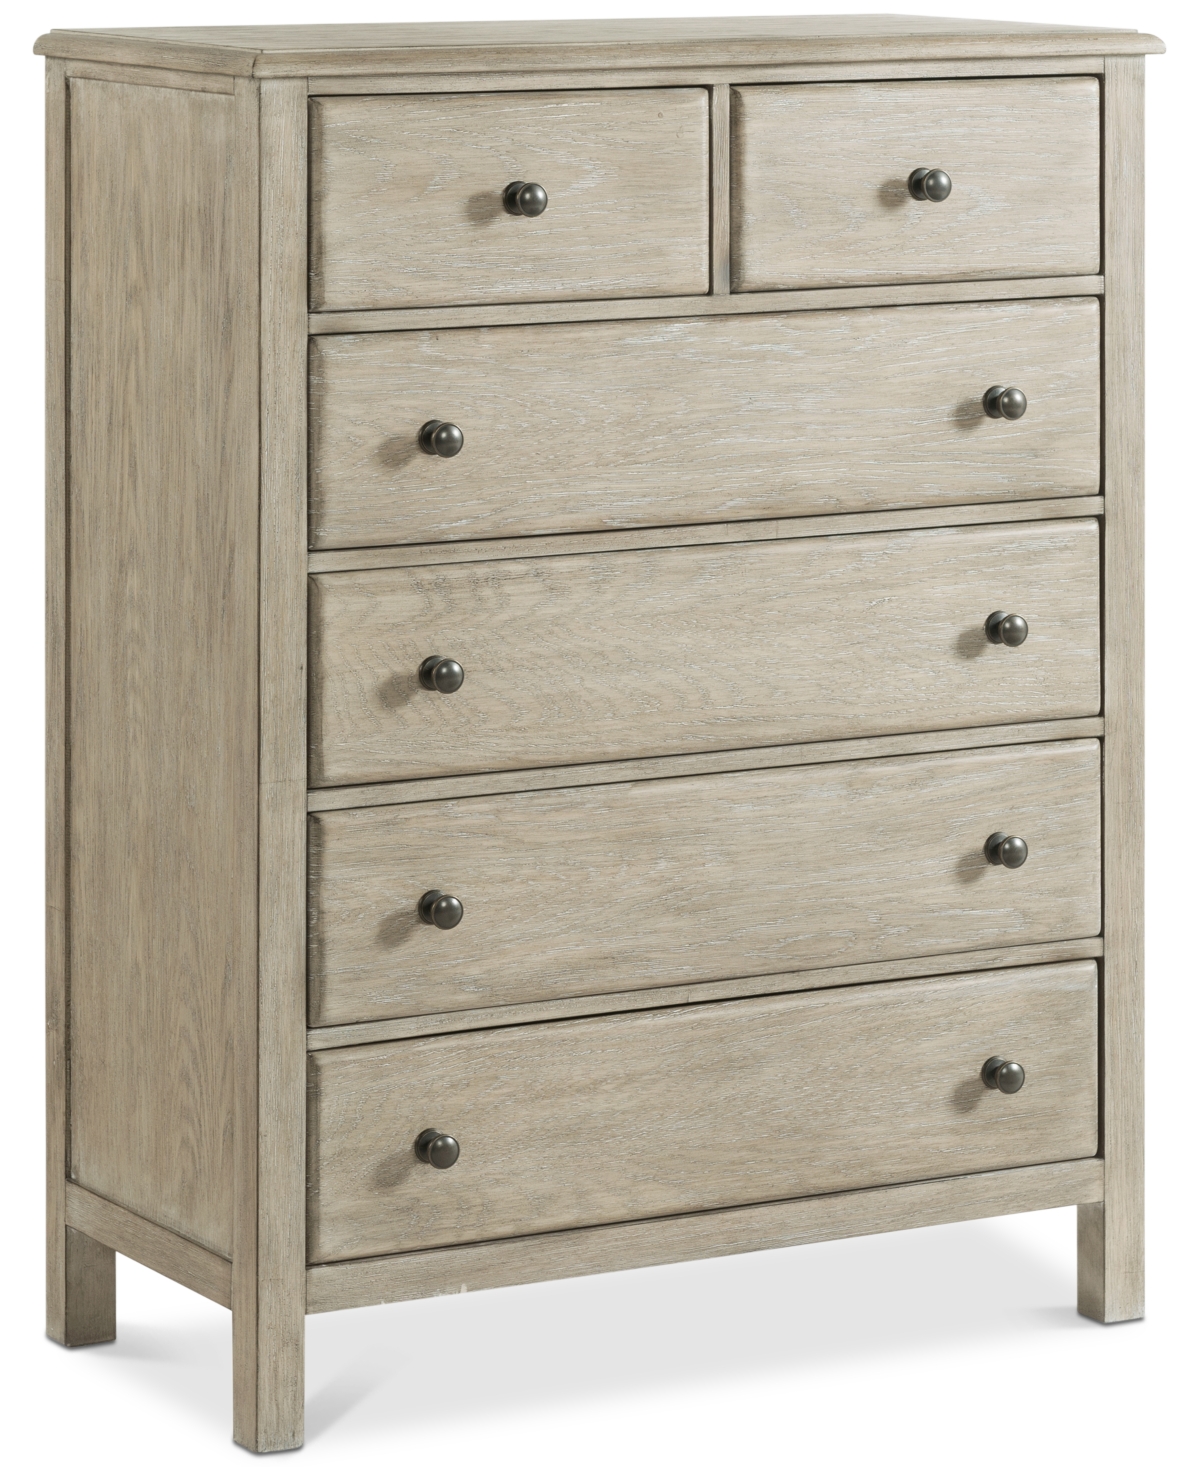 Bedroom Furniture on Sale, Clearance & Closeout Deals - Macy's